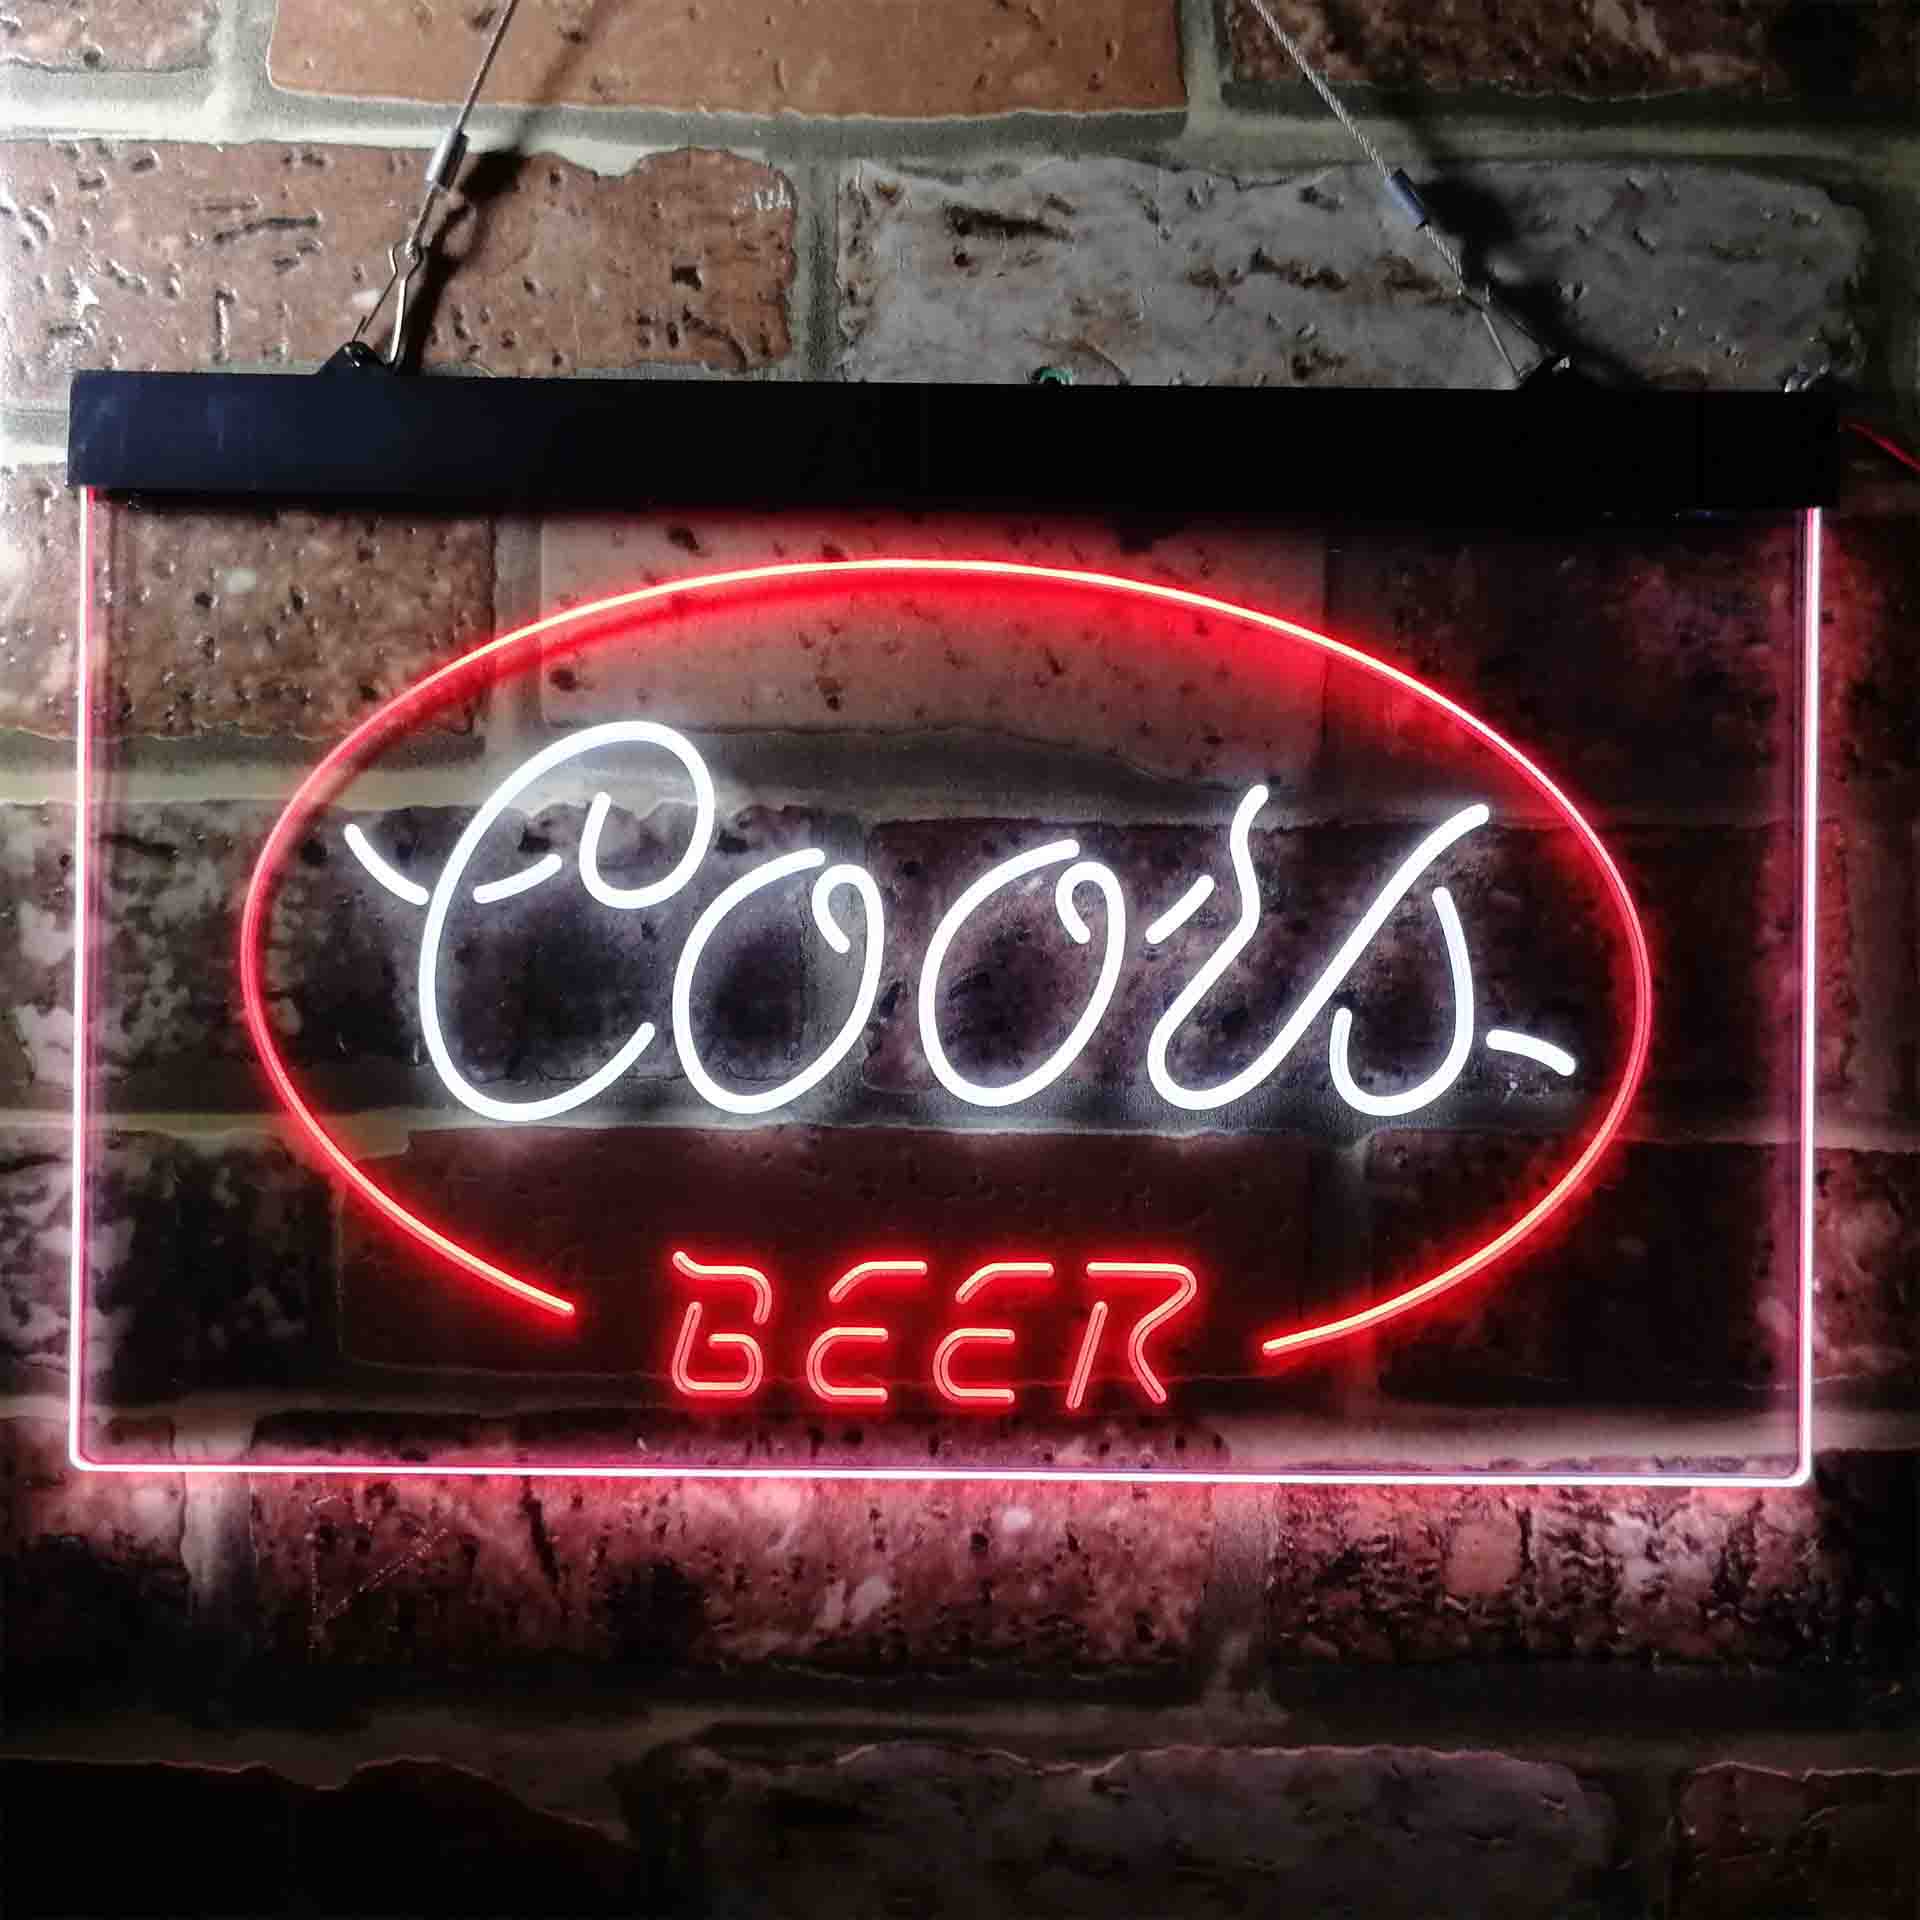 Coors Beer Oval Classic Neon-Like LED Sign